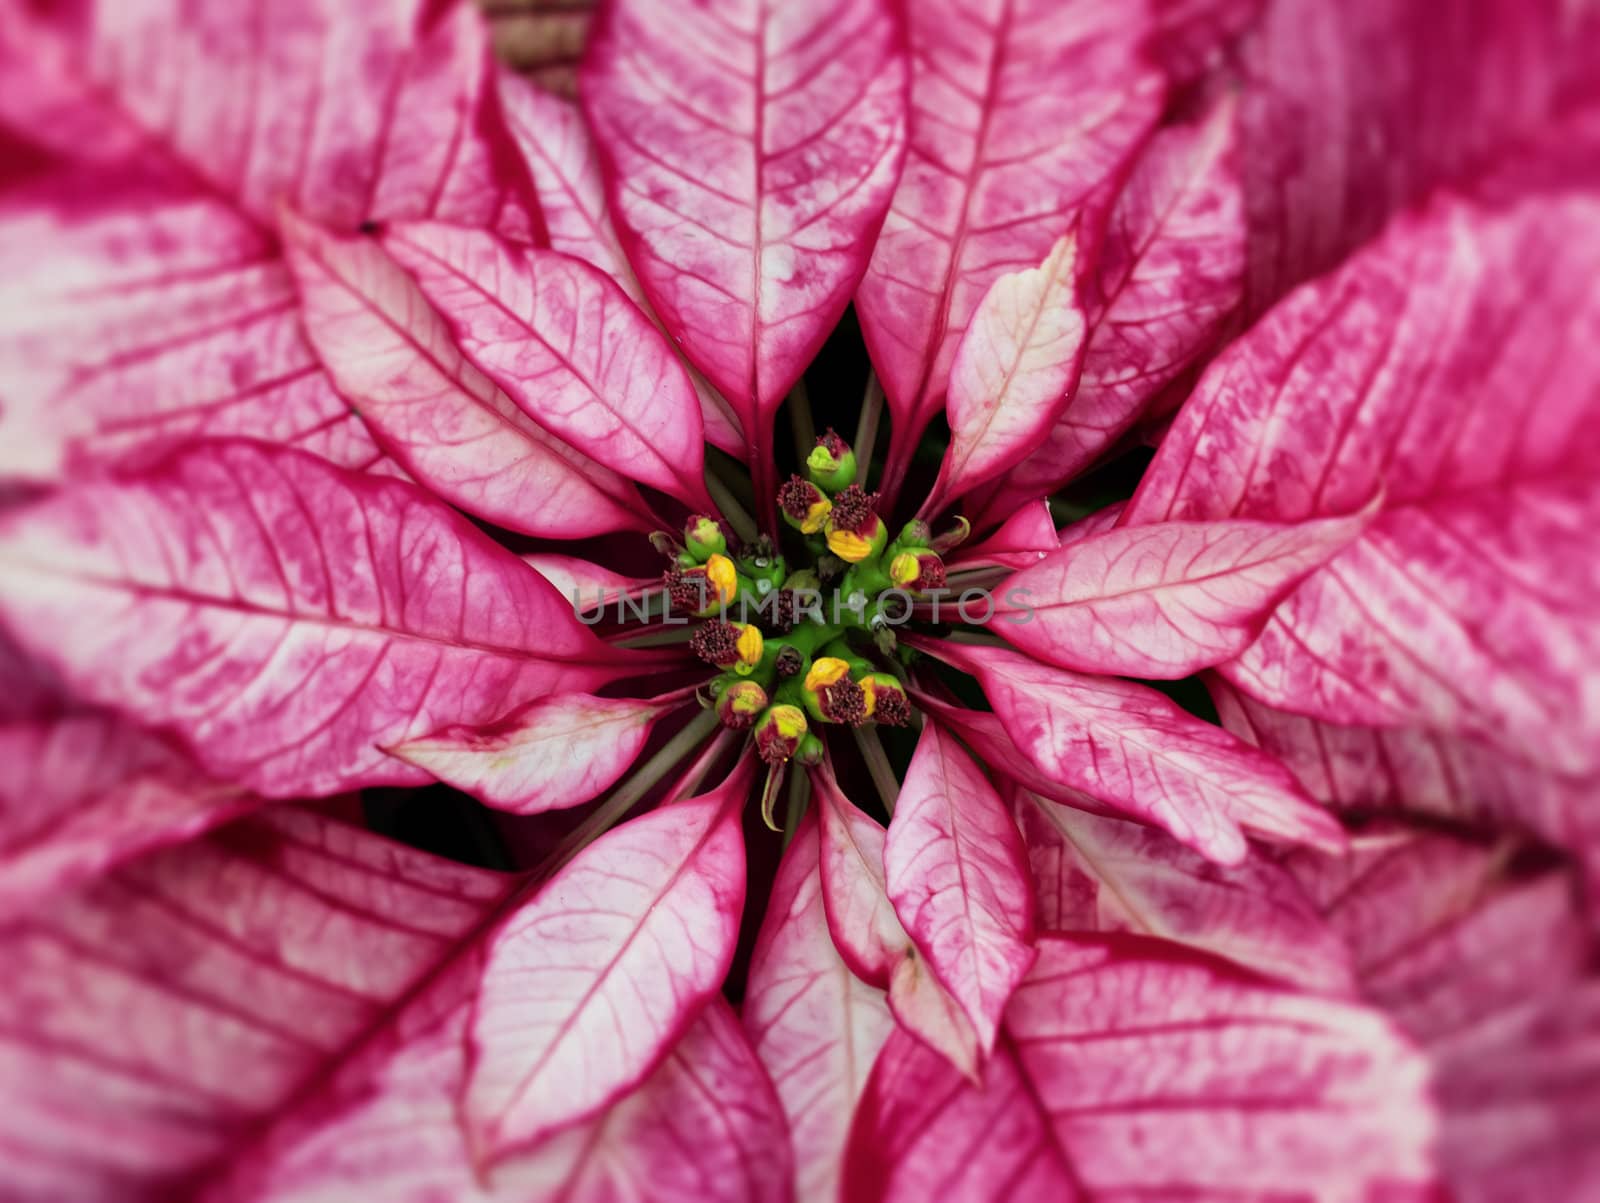 Up close with a Christmas Pointsettia